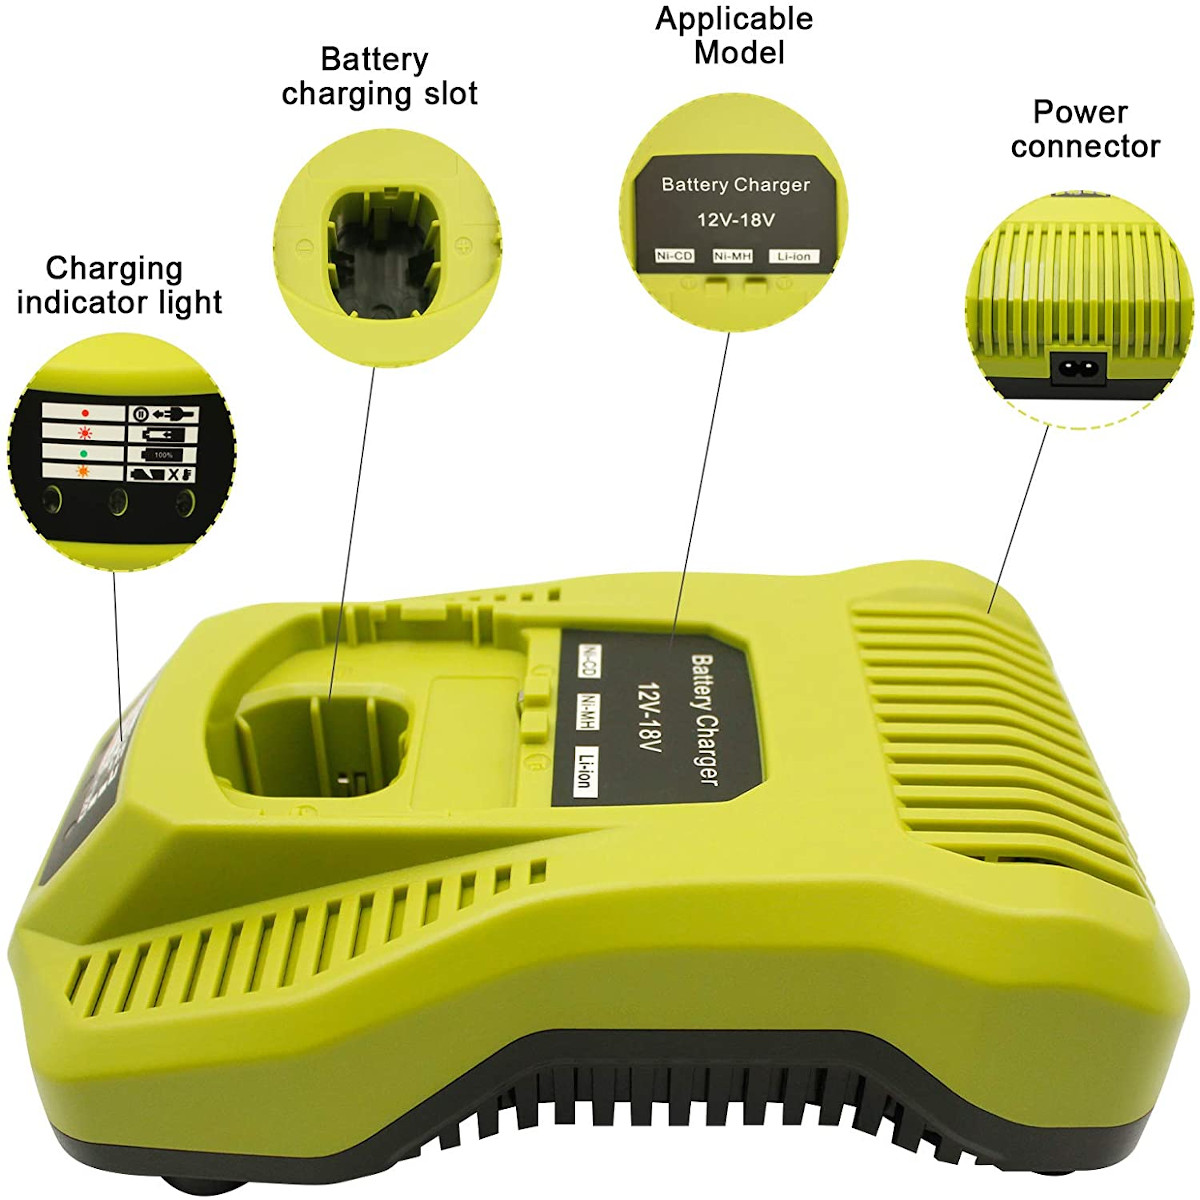 Ryobi-12V-18V-P117-Battery-Charger-Lithium-Battery-Nickel-Charge-Replacement-for-Ryobi-One-Plus-P100-1828672-1